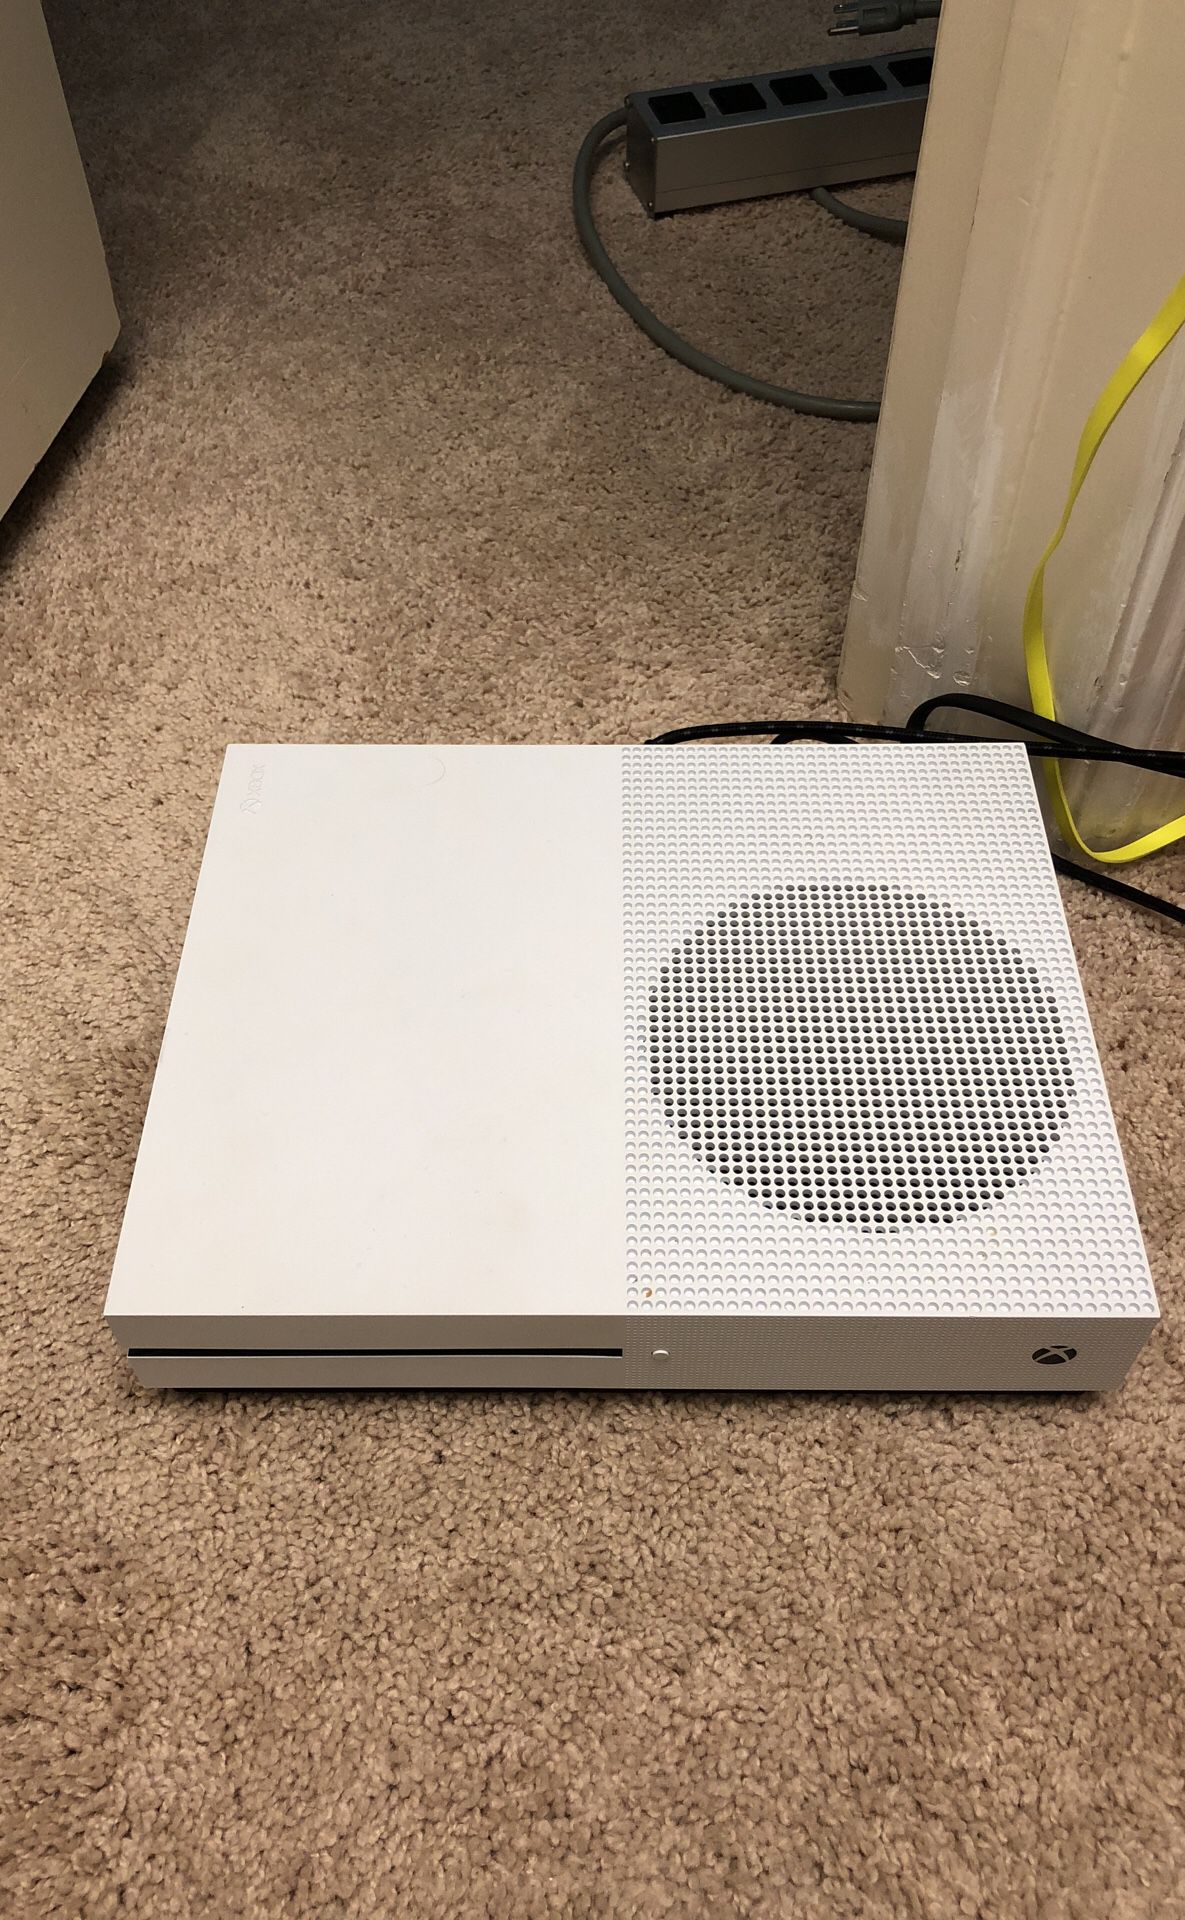 Xbox One S with controller and multiple games